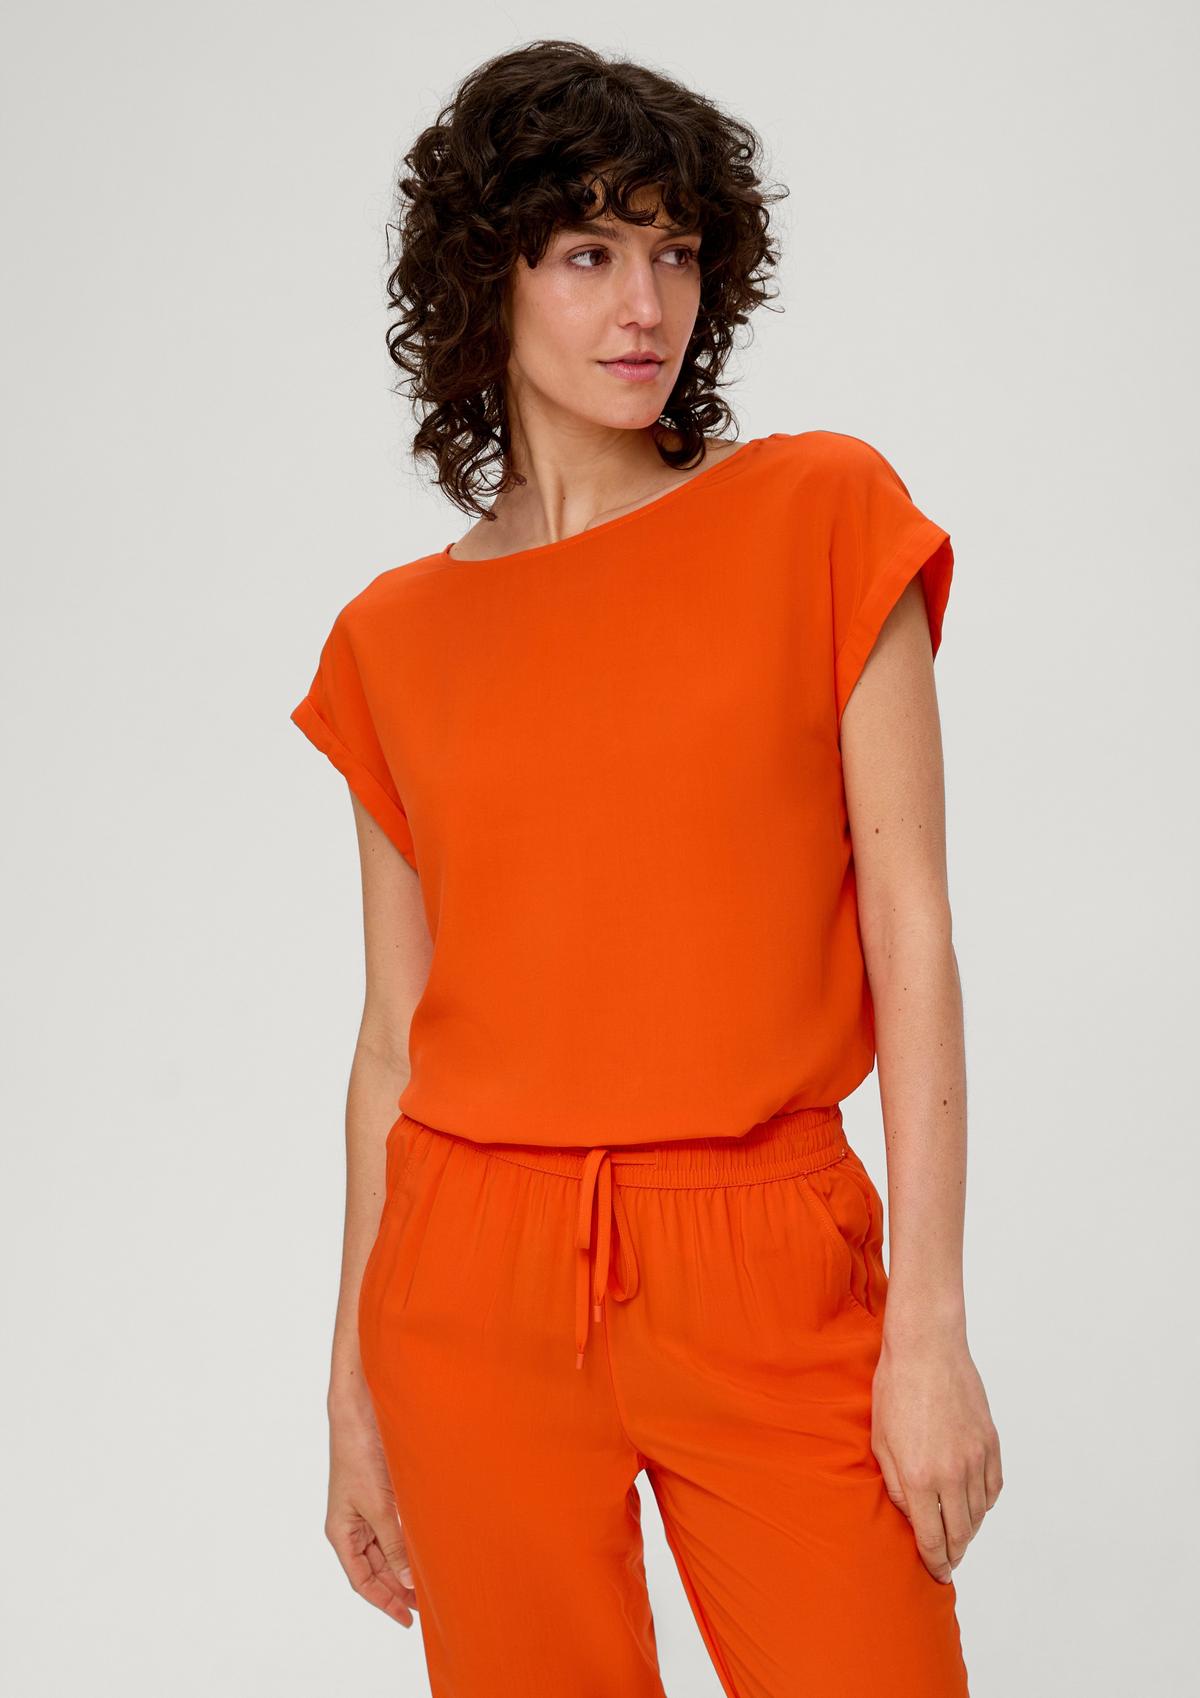 Viscose blouse with a cut-out at the back